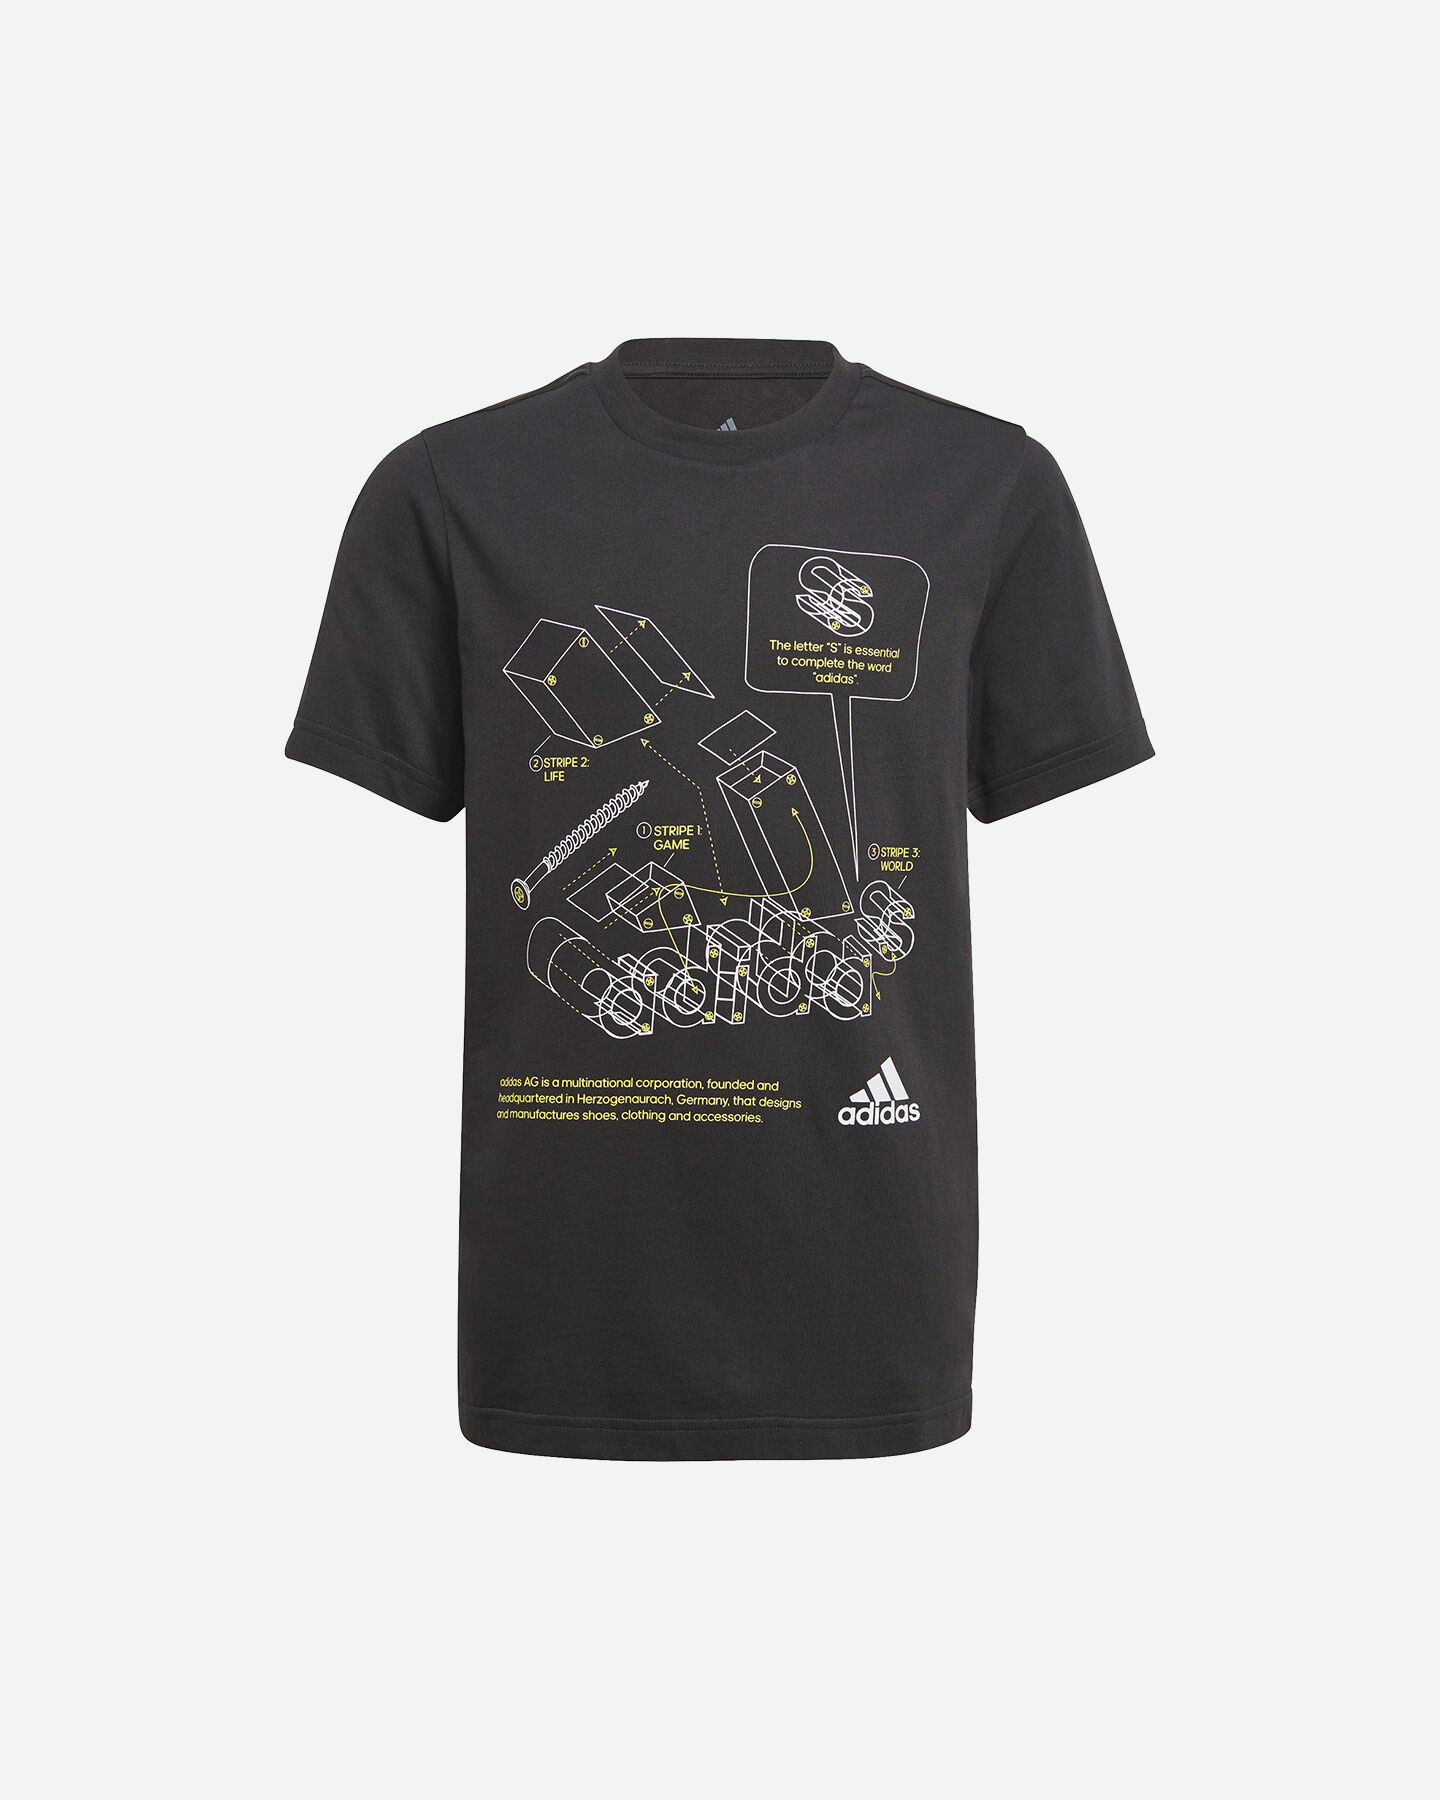  T-Shirt ADIDAS GRAPHIC JR S5273761|UNI|7-8A scatto 0